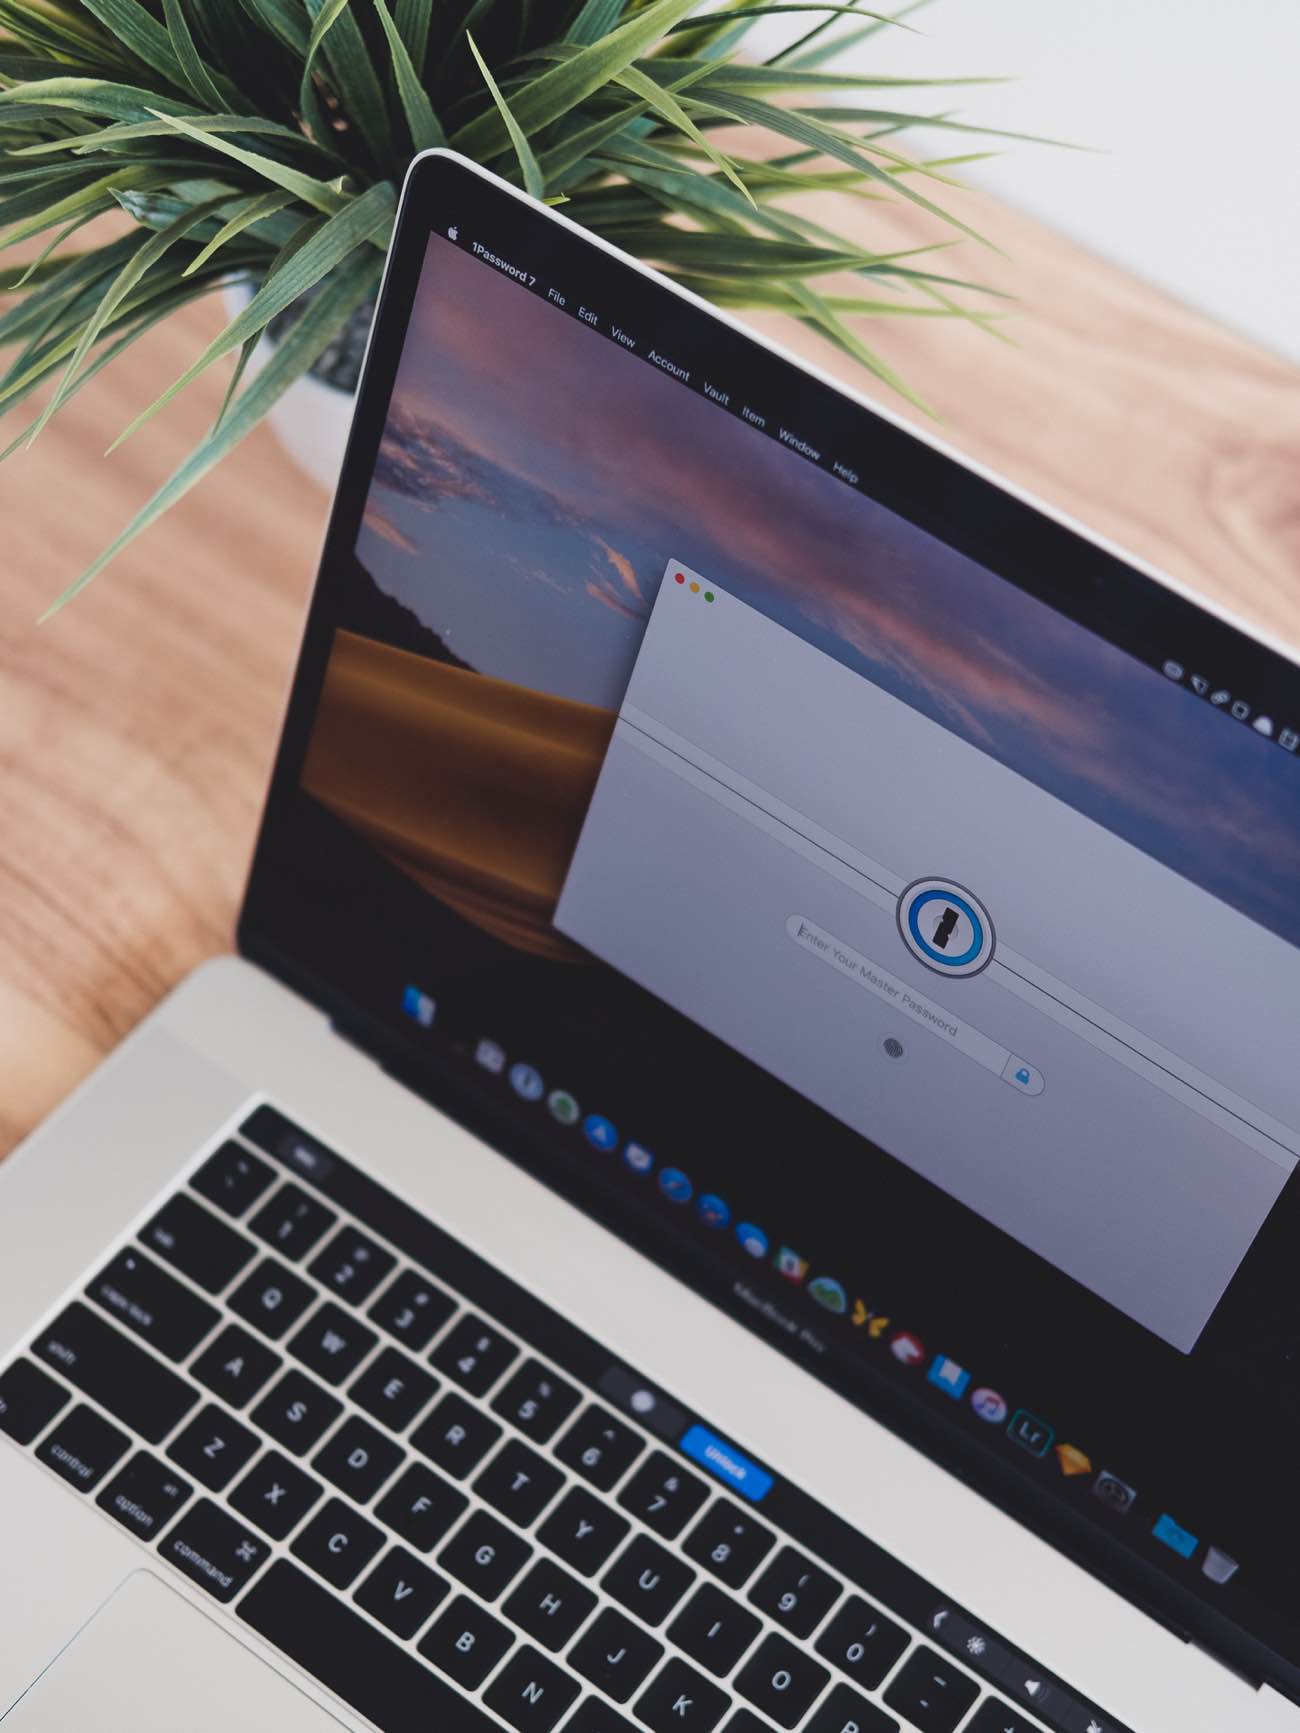 Unlock 1Password with this video tutorial course from The Sweet Setup